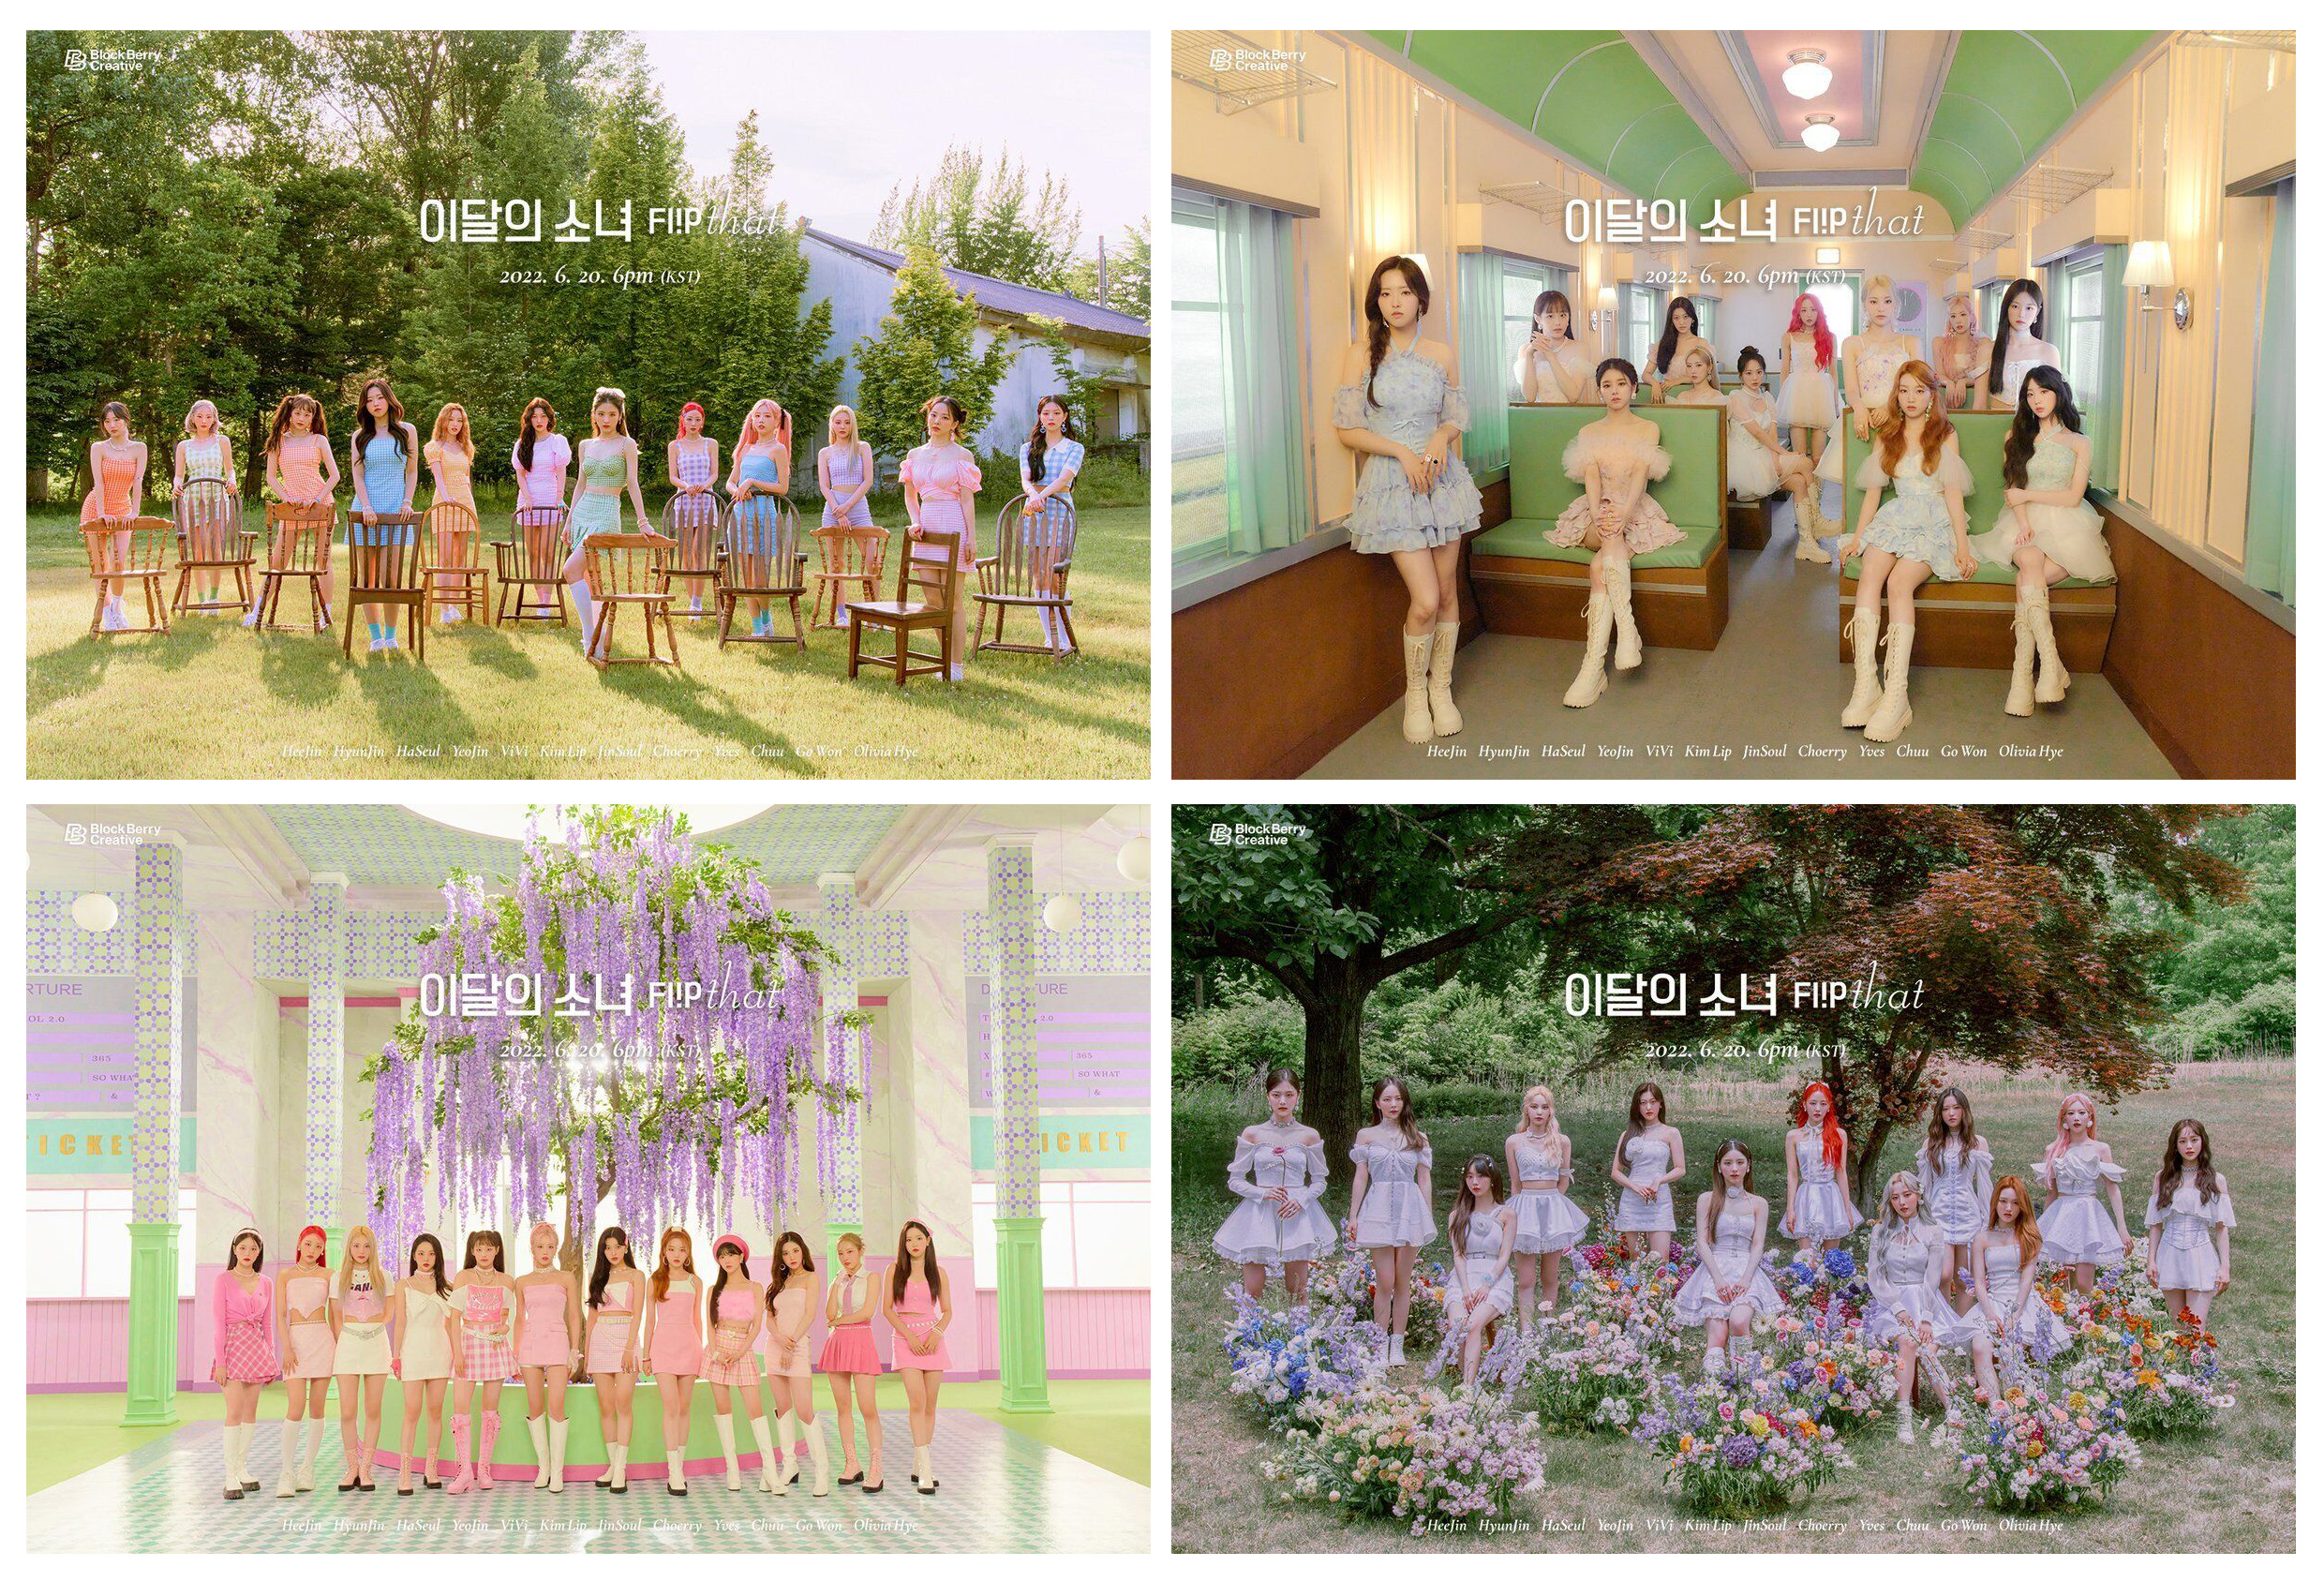 Summer Special (Flip That) (Version A, B,C or D) | Loona image0